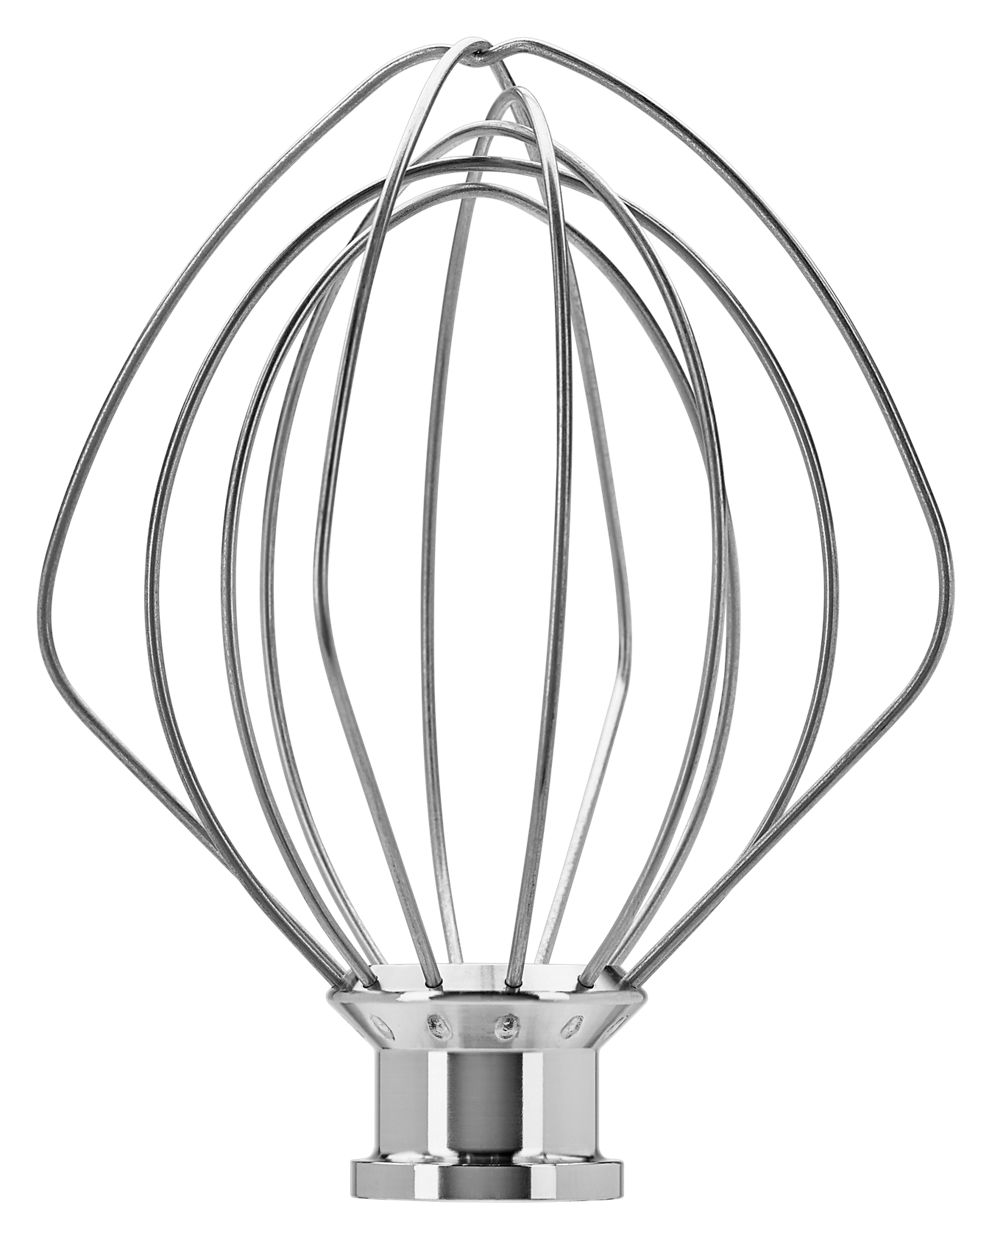 11-Wire Whip Bowl-Lift Stand Mixer Attachment